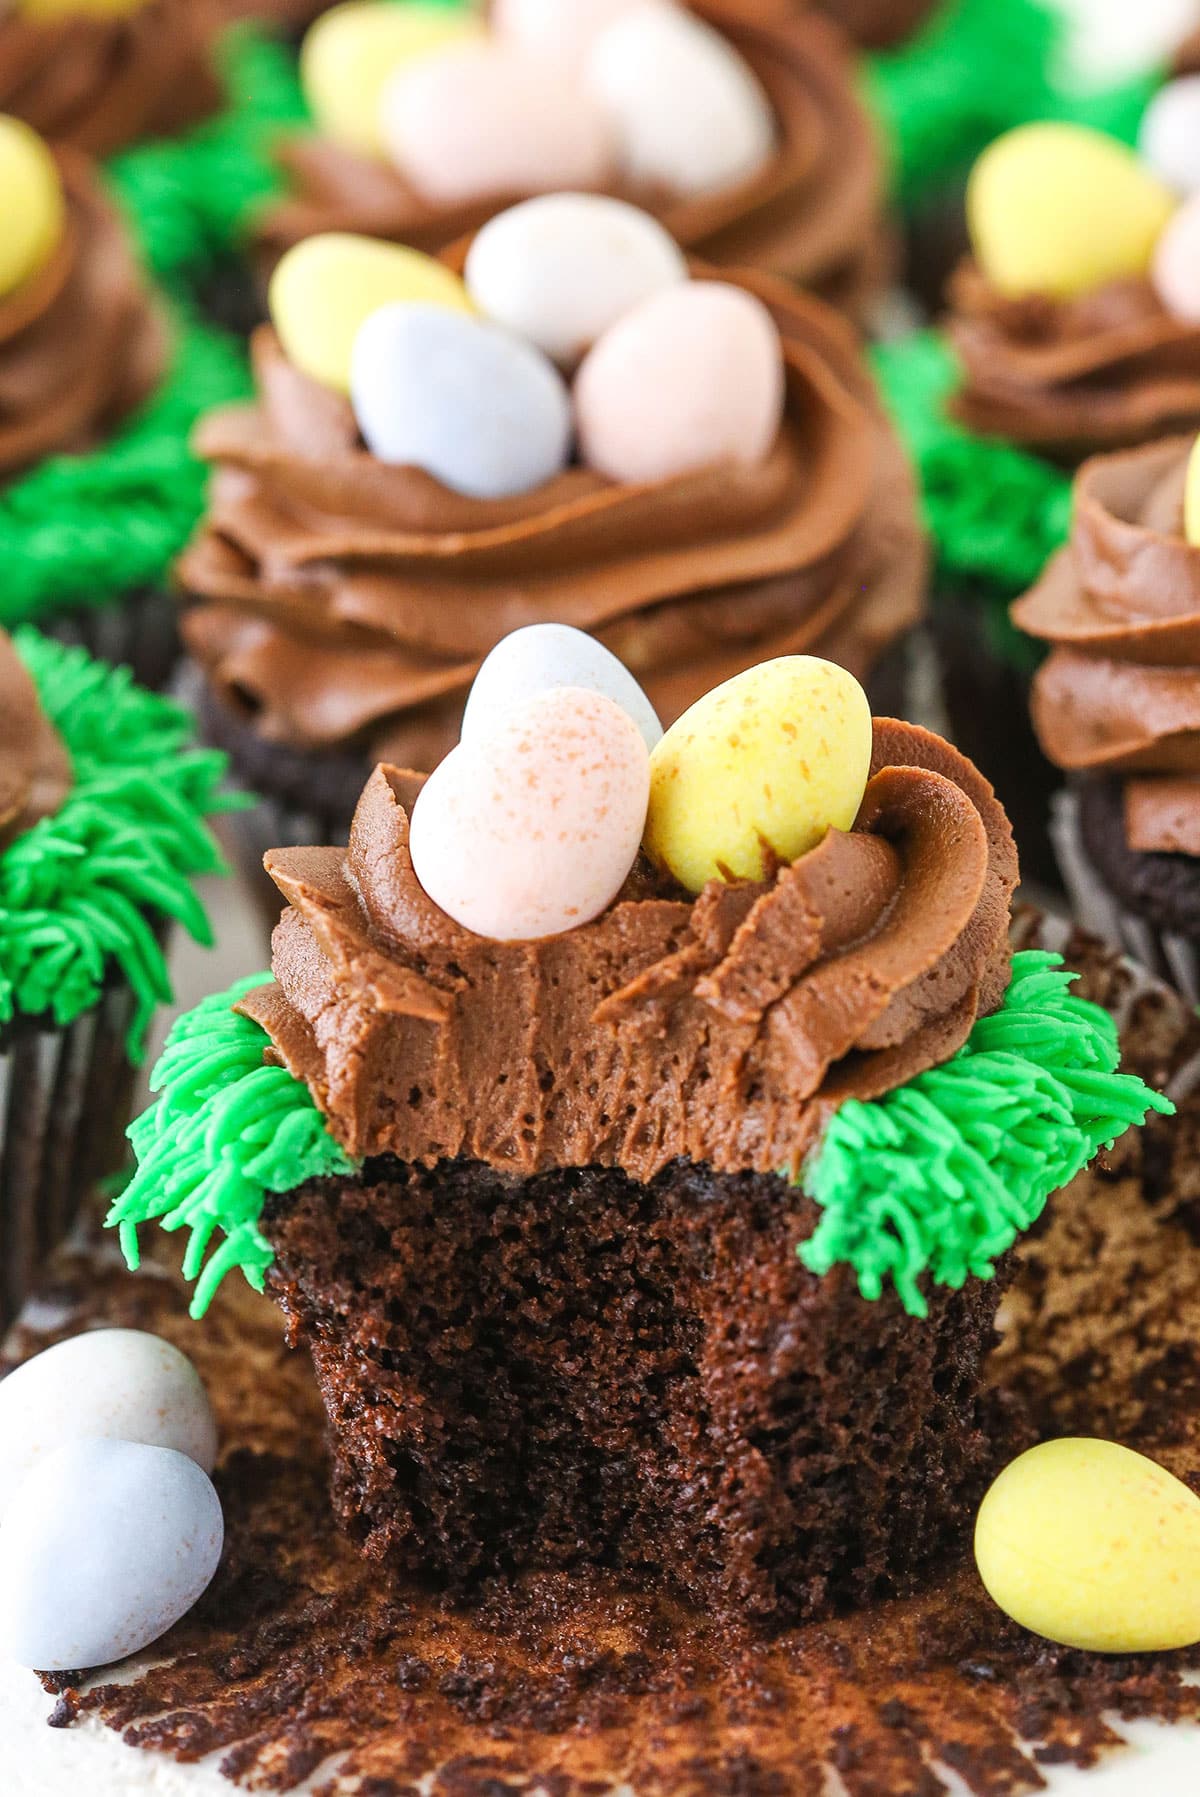 An Easter Egg Chocolate Cupcake with a bite removed and surrounded by more Easter Egg Chocolate Cupcakes